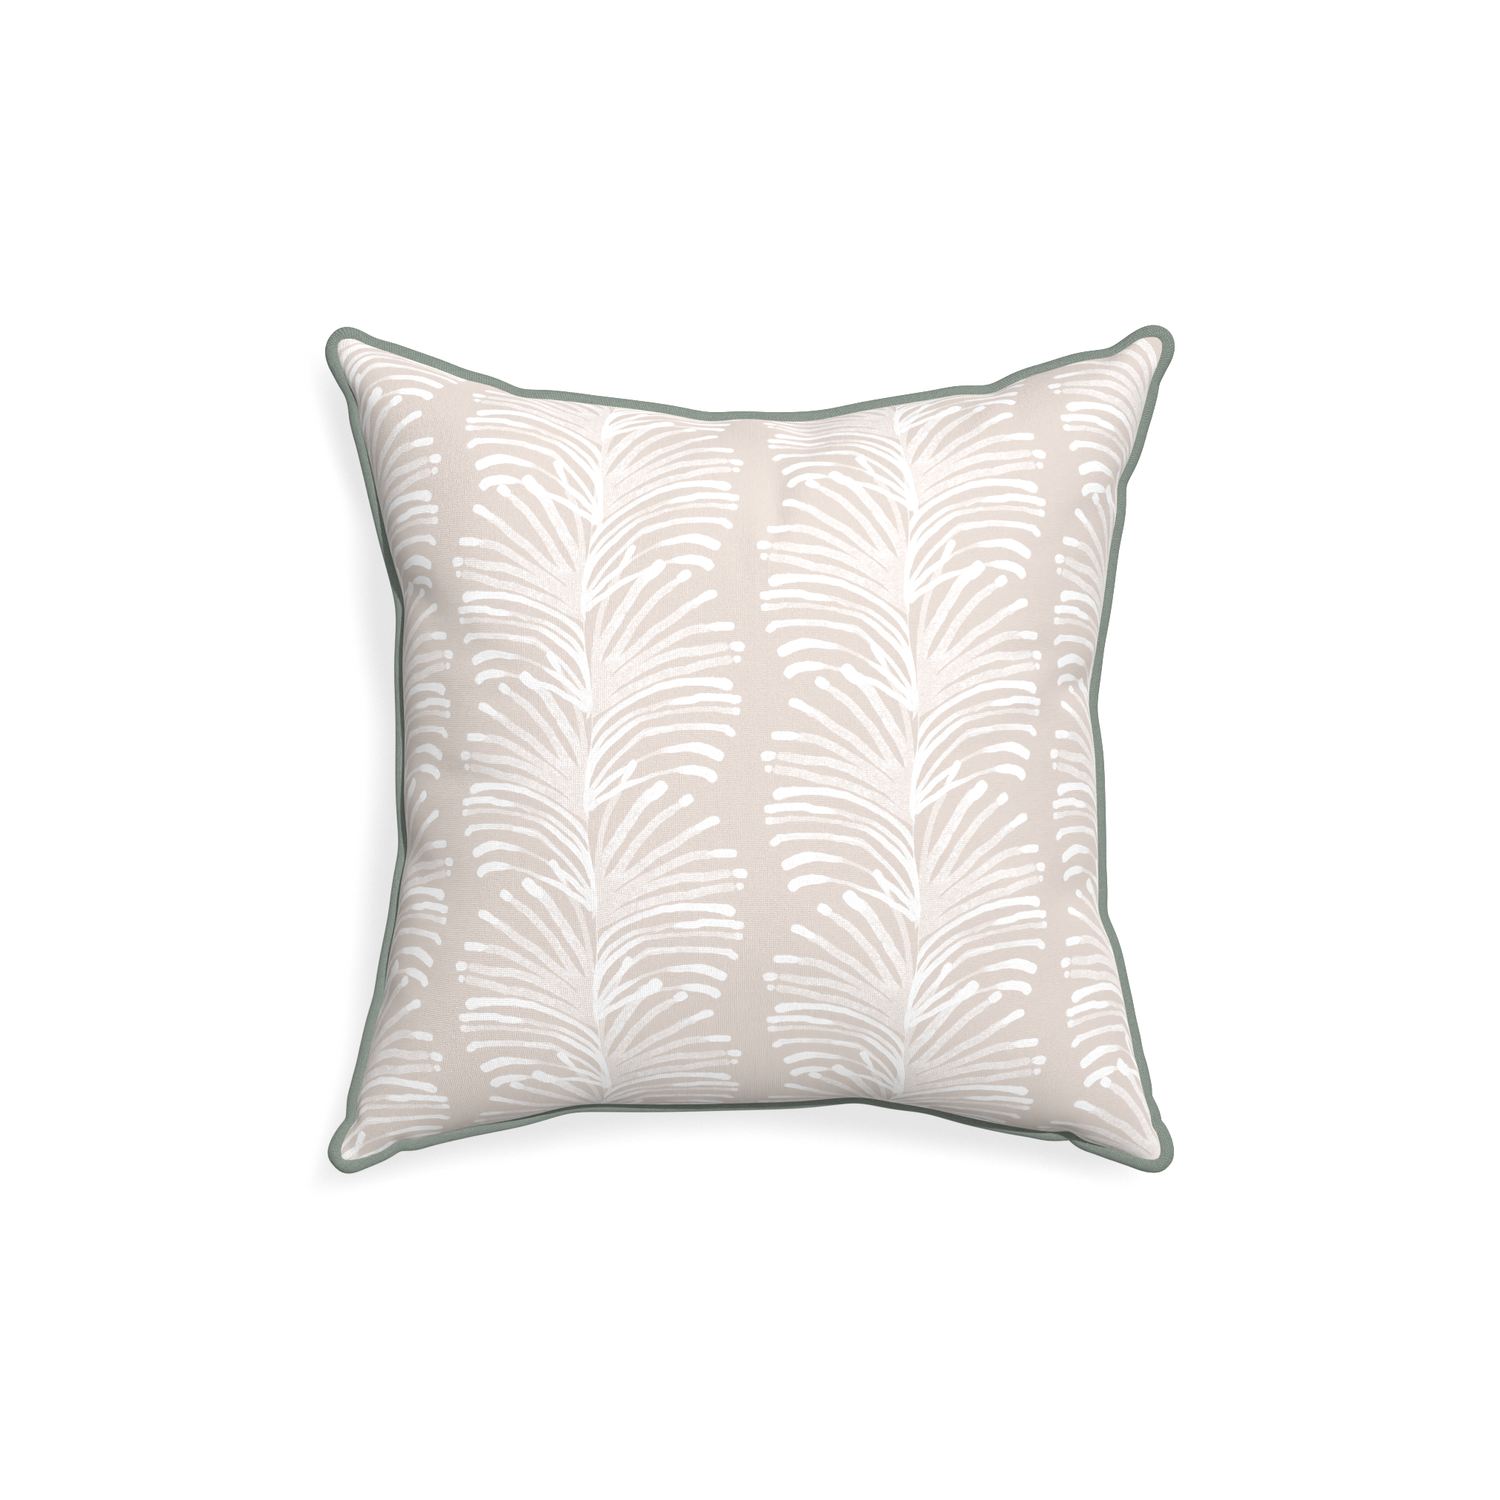 18-square emma sand custom sand colored botanical stripepillow with sage piping on white background